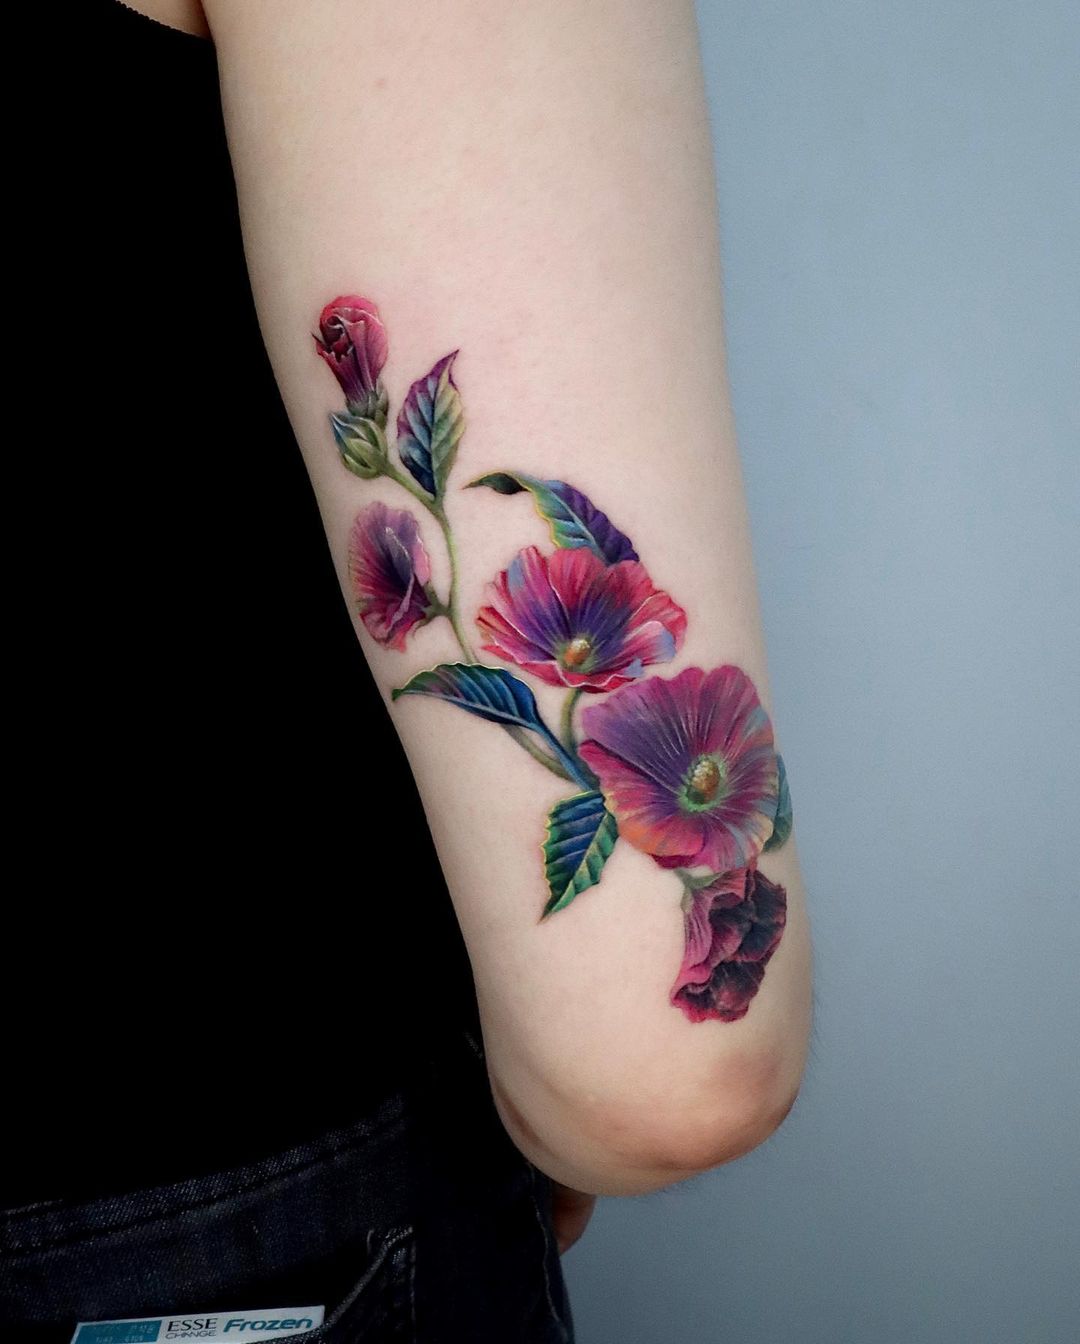 Orchid Tattoo Meaning - Tattoos With Meaning